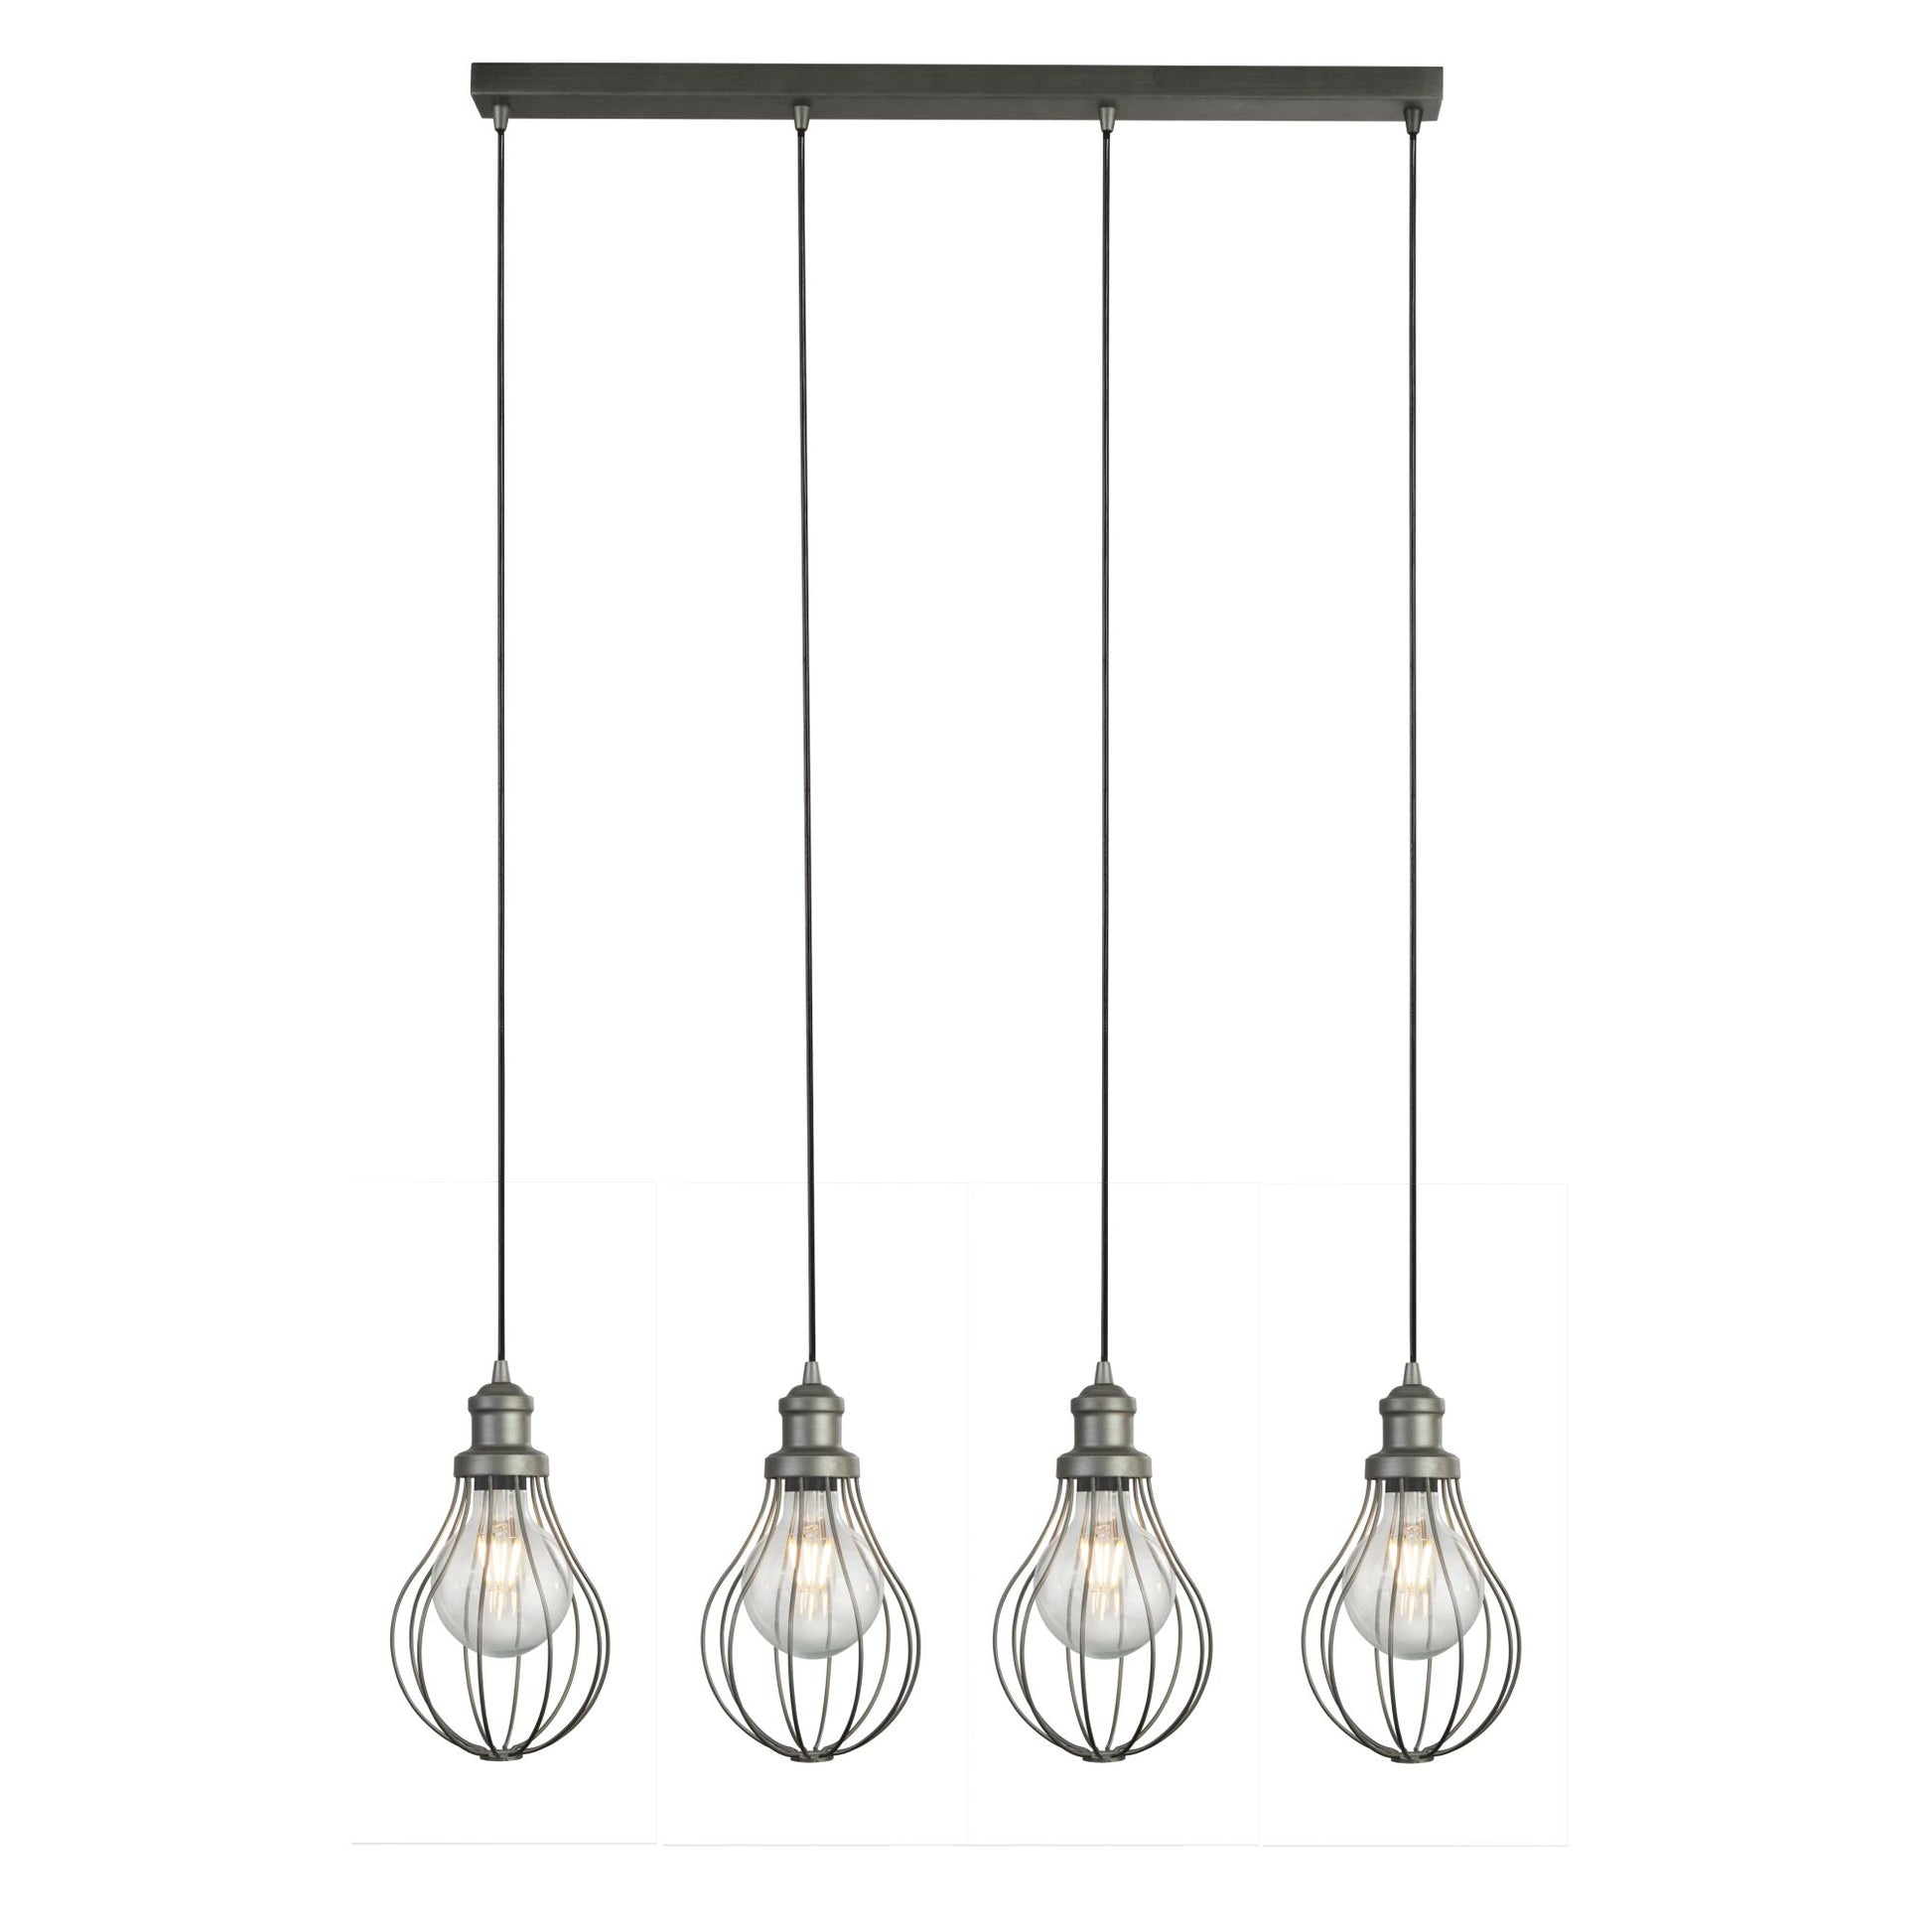 Balloon Cage 4 Light Pewter Ceiling Pendant